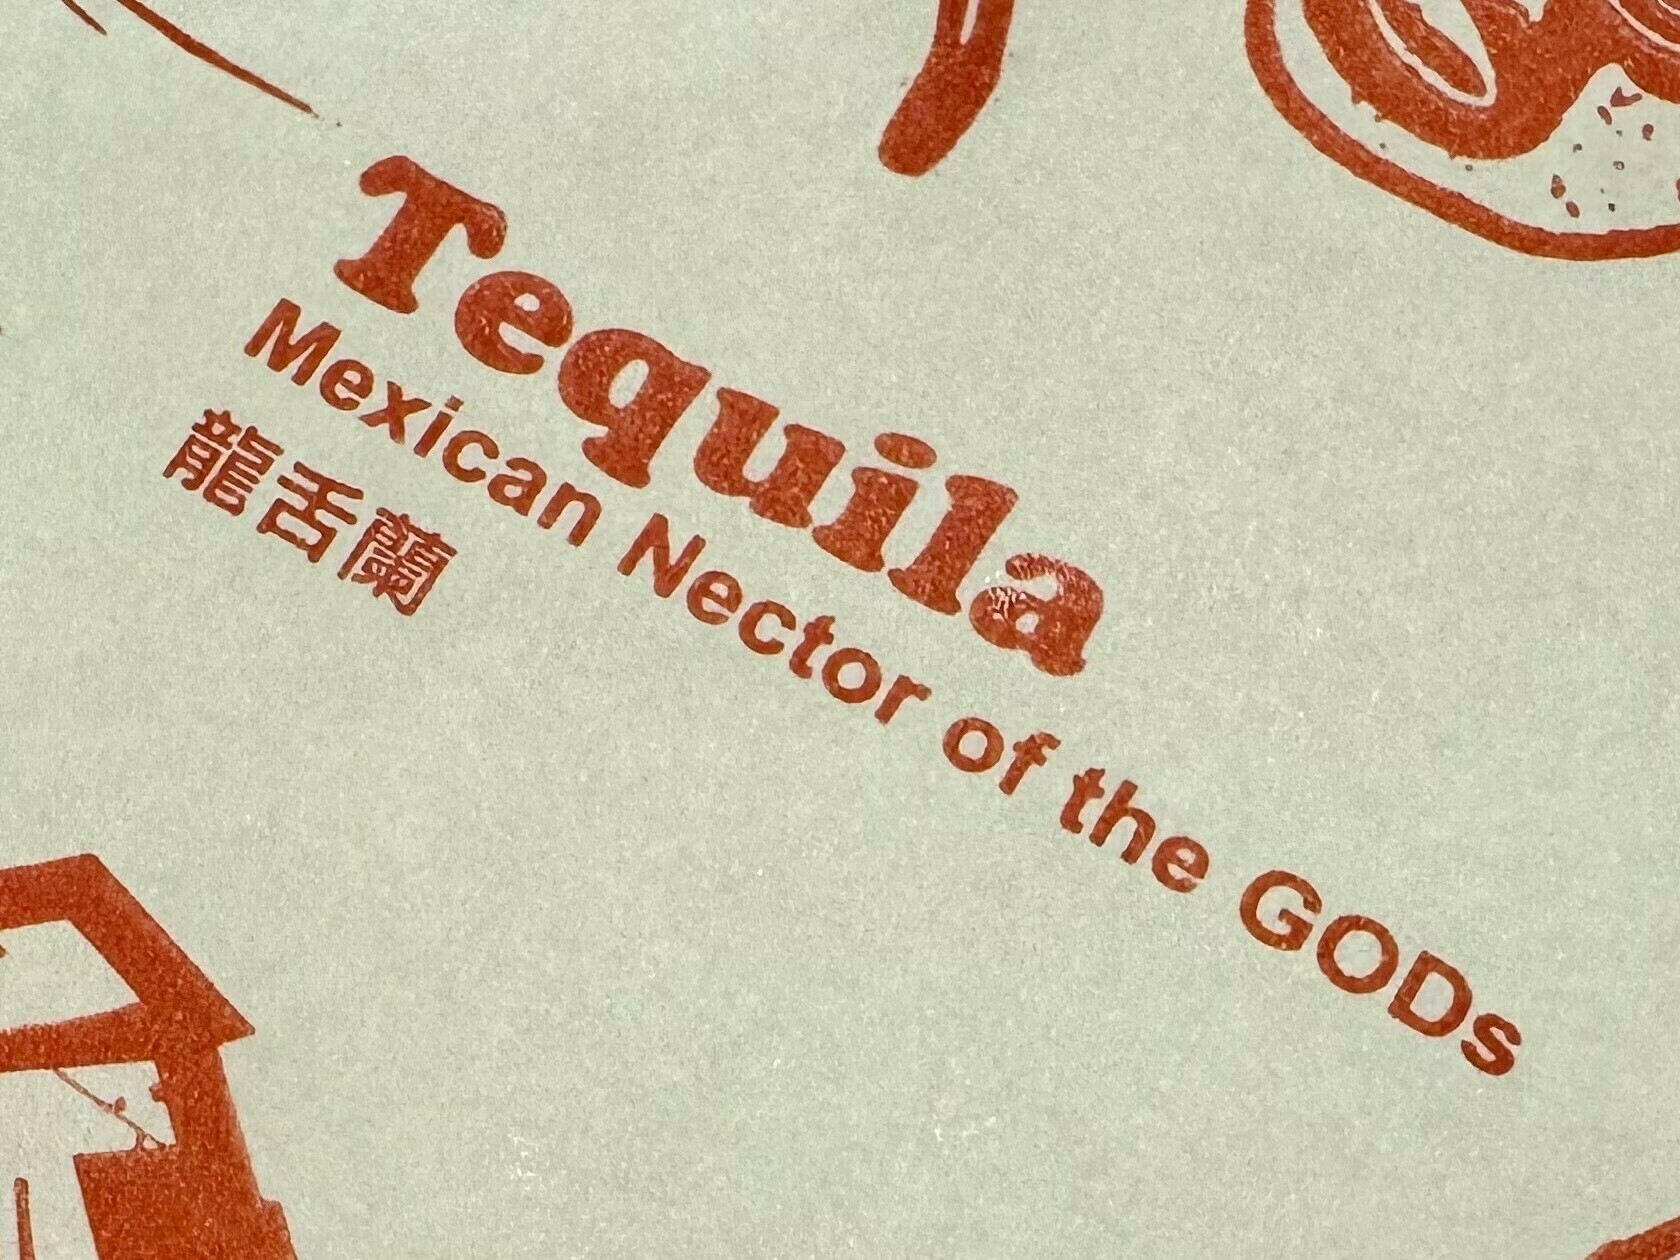 A piece of paper with "Tequila. Mexican Nector (sic) of the GODs" typed on it in red ink